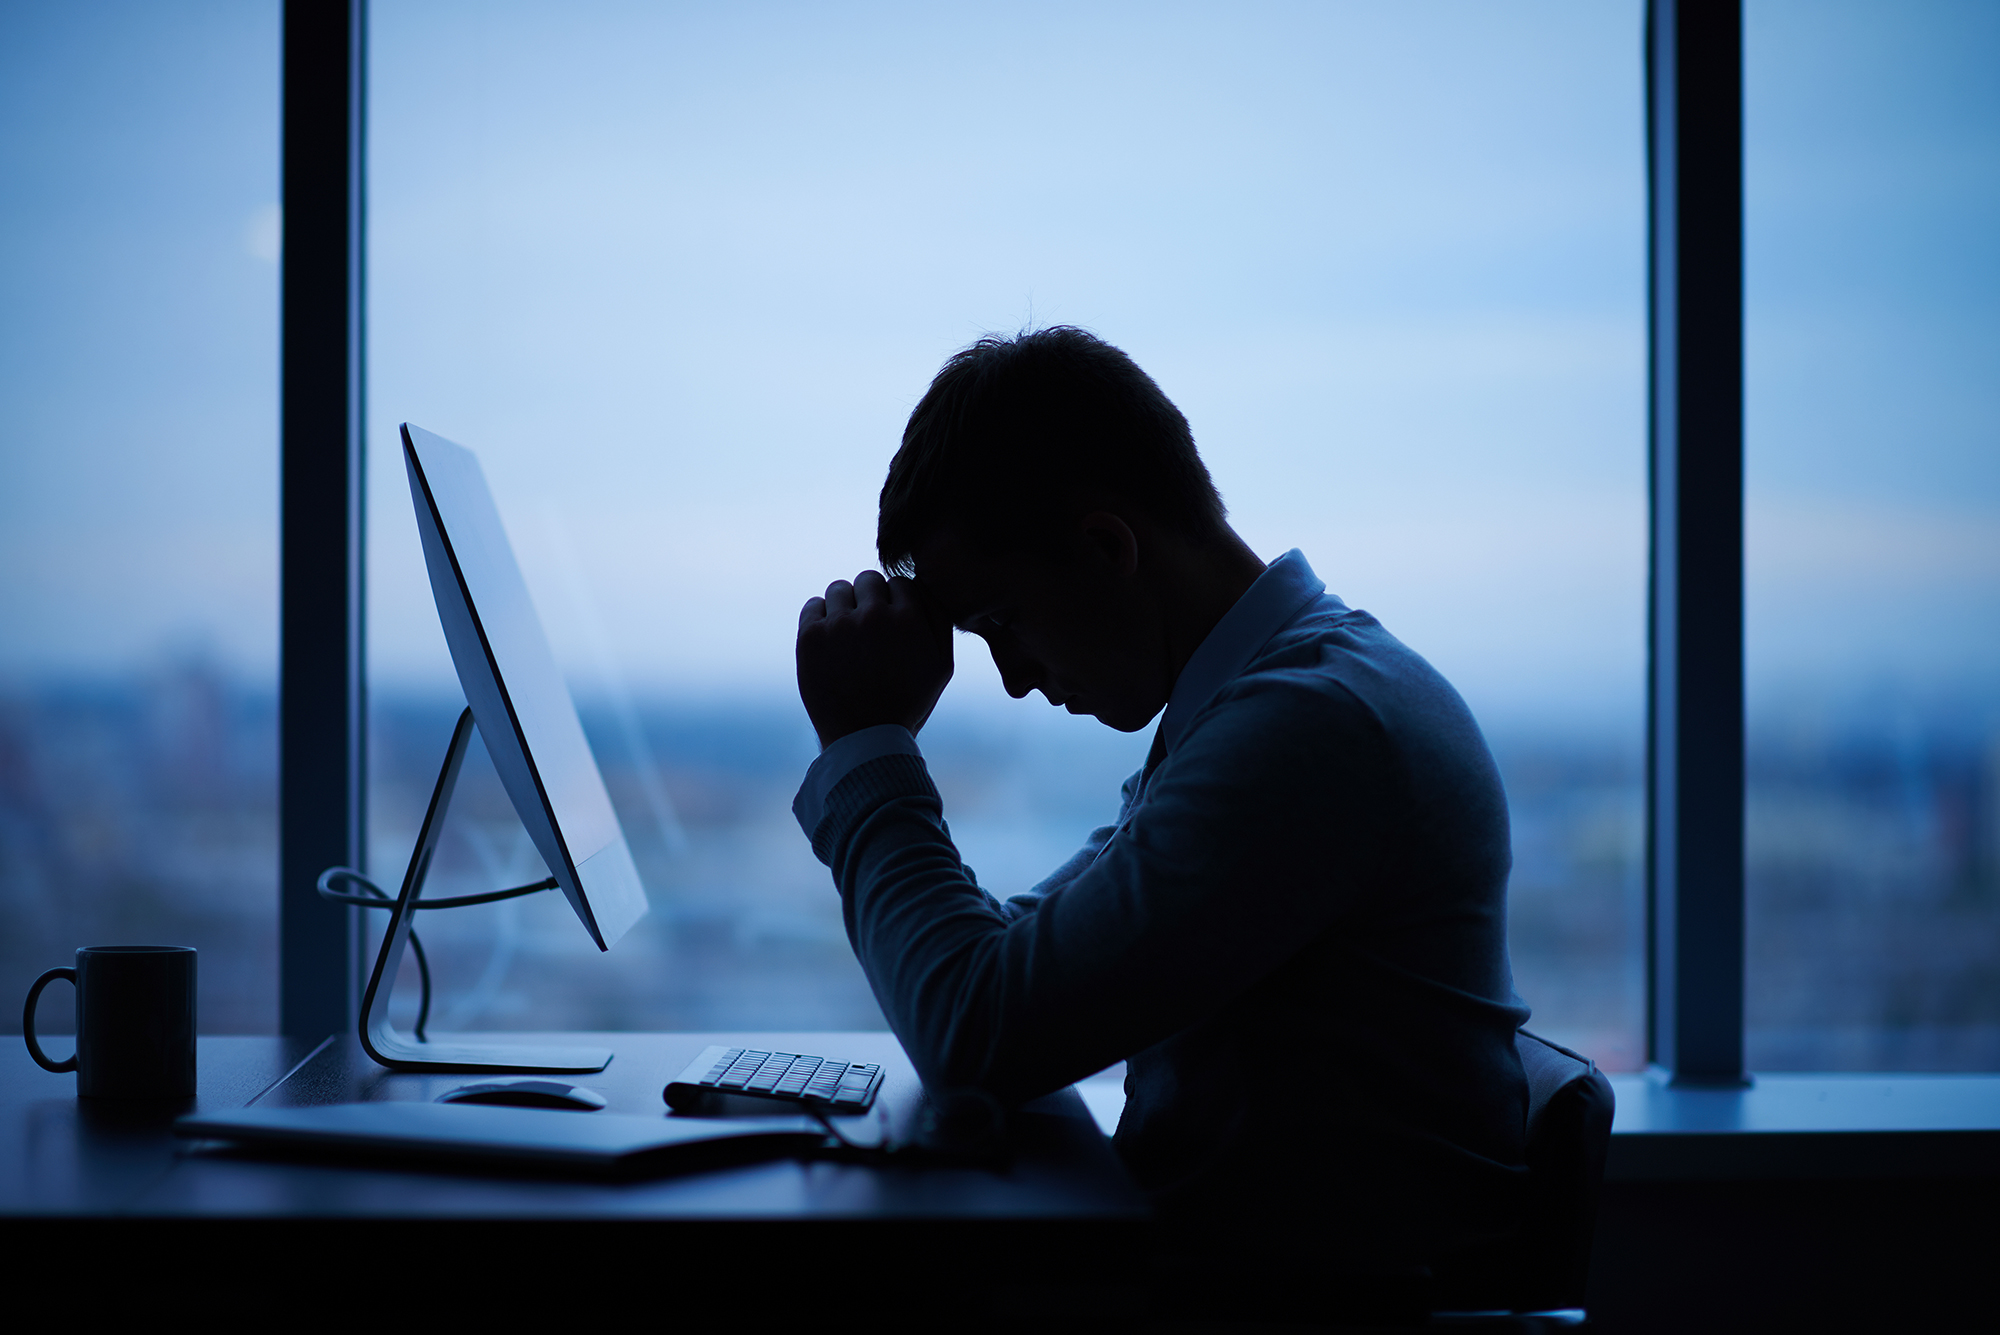 Stressed man in front a computer. (Image: Shutterstock)